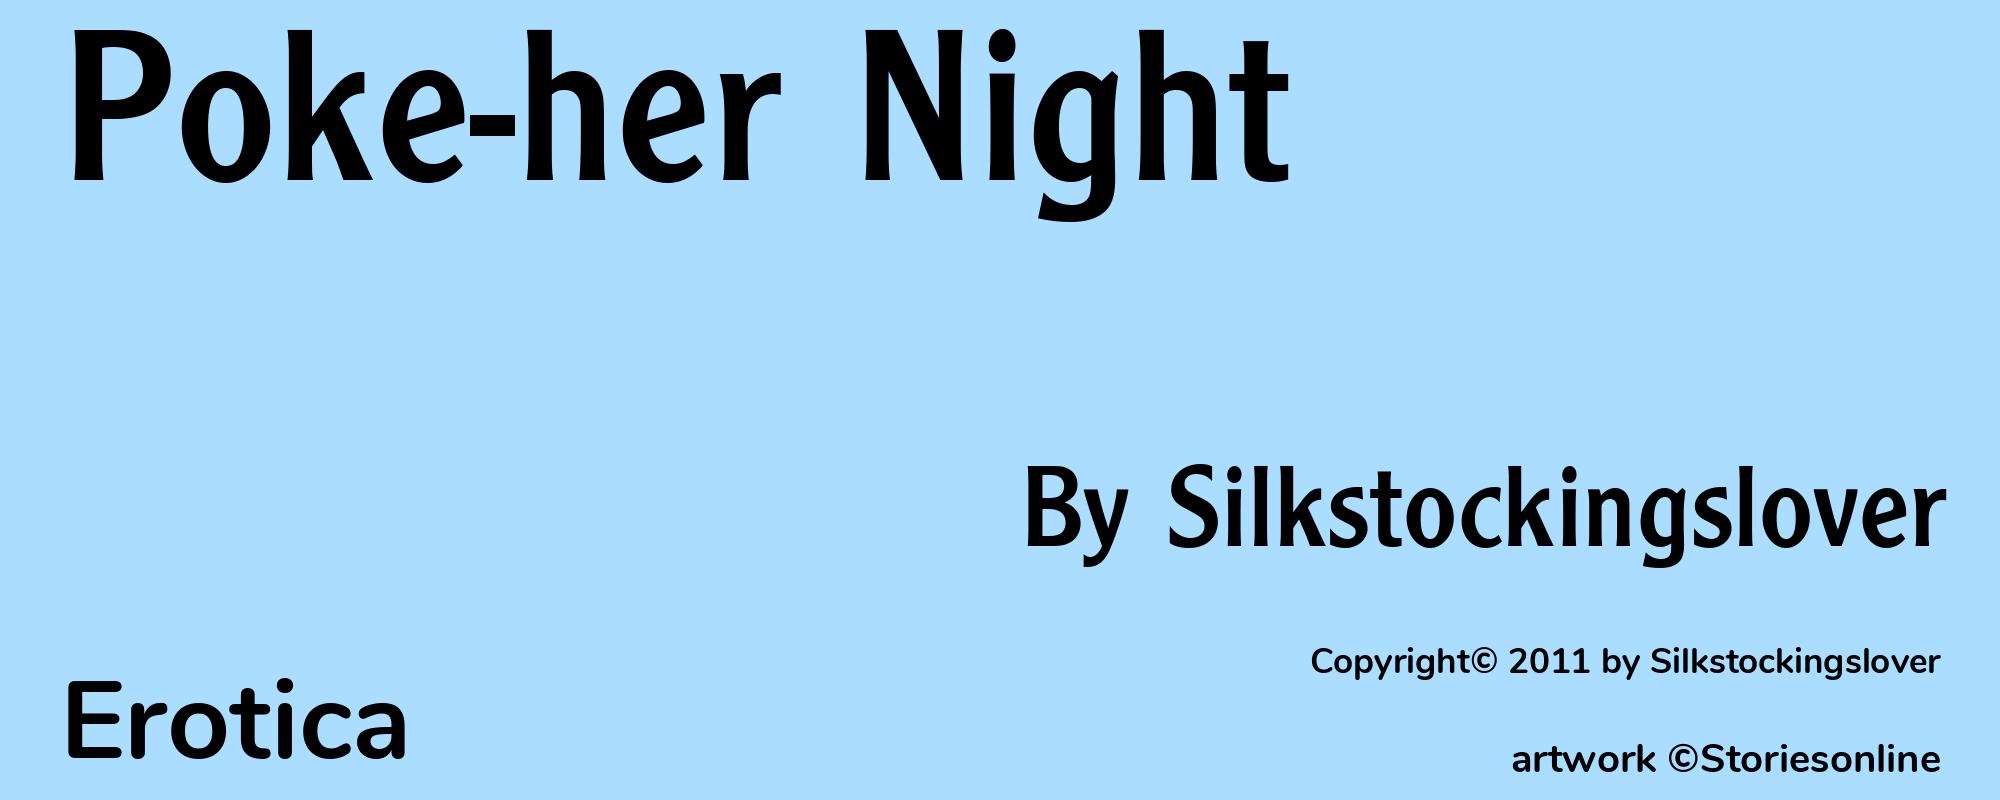 Poke-her Night - Cover